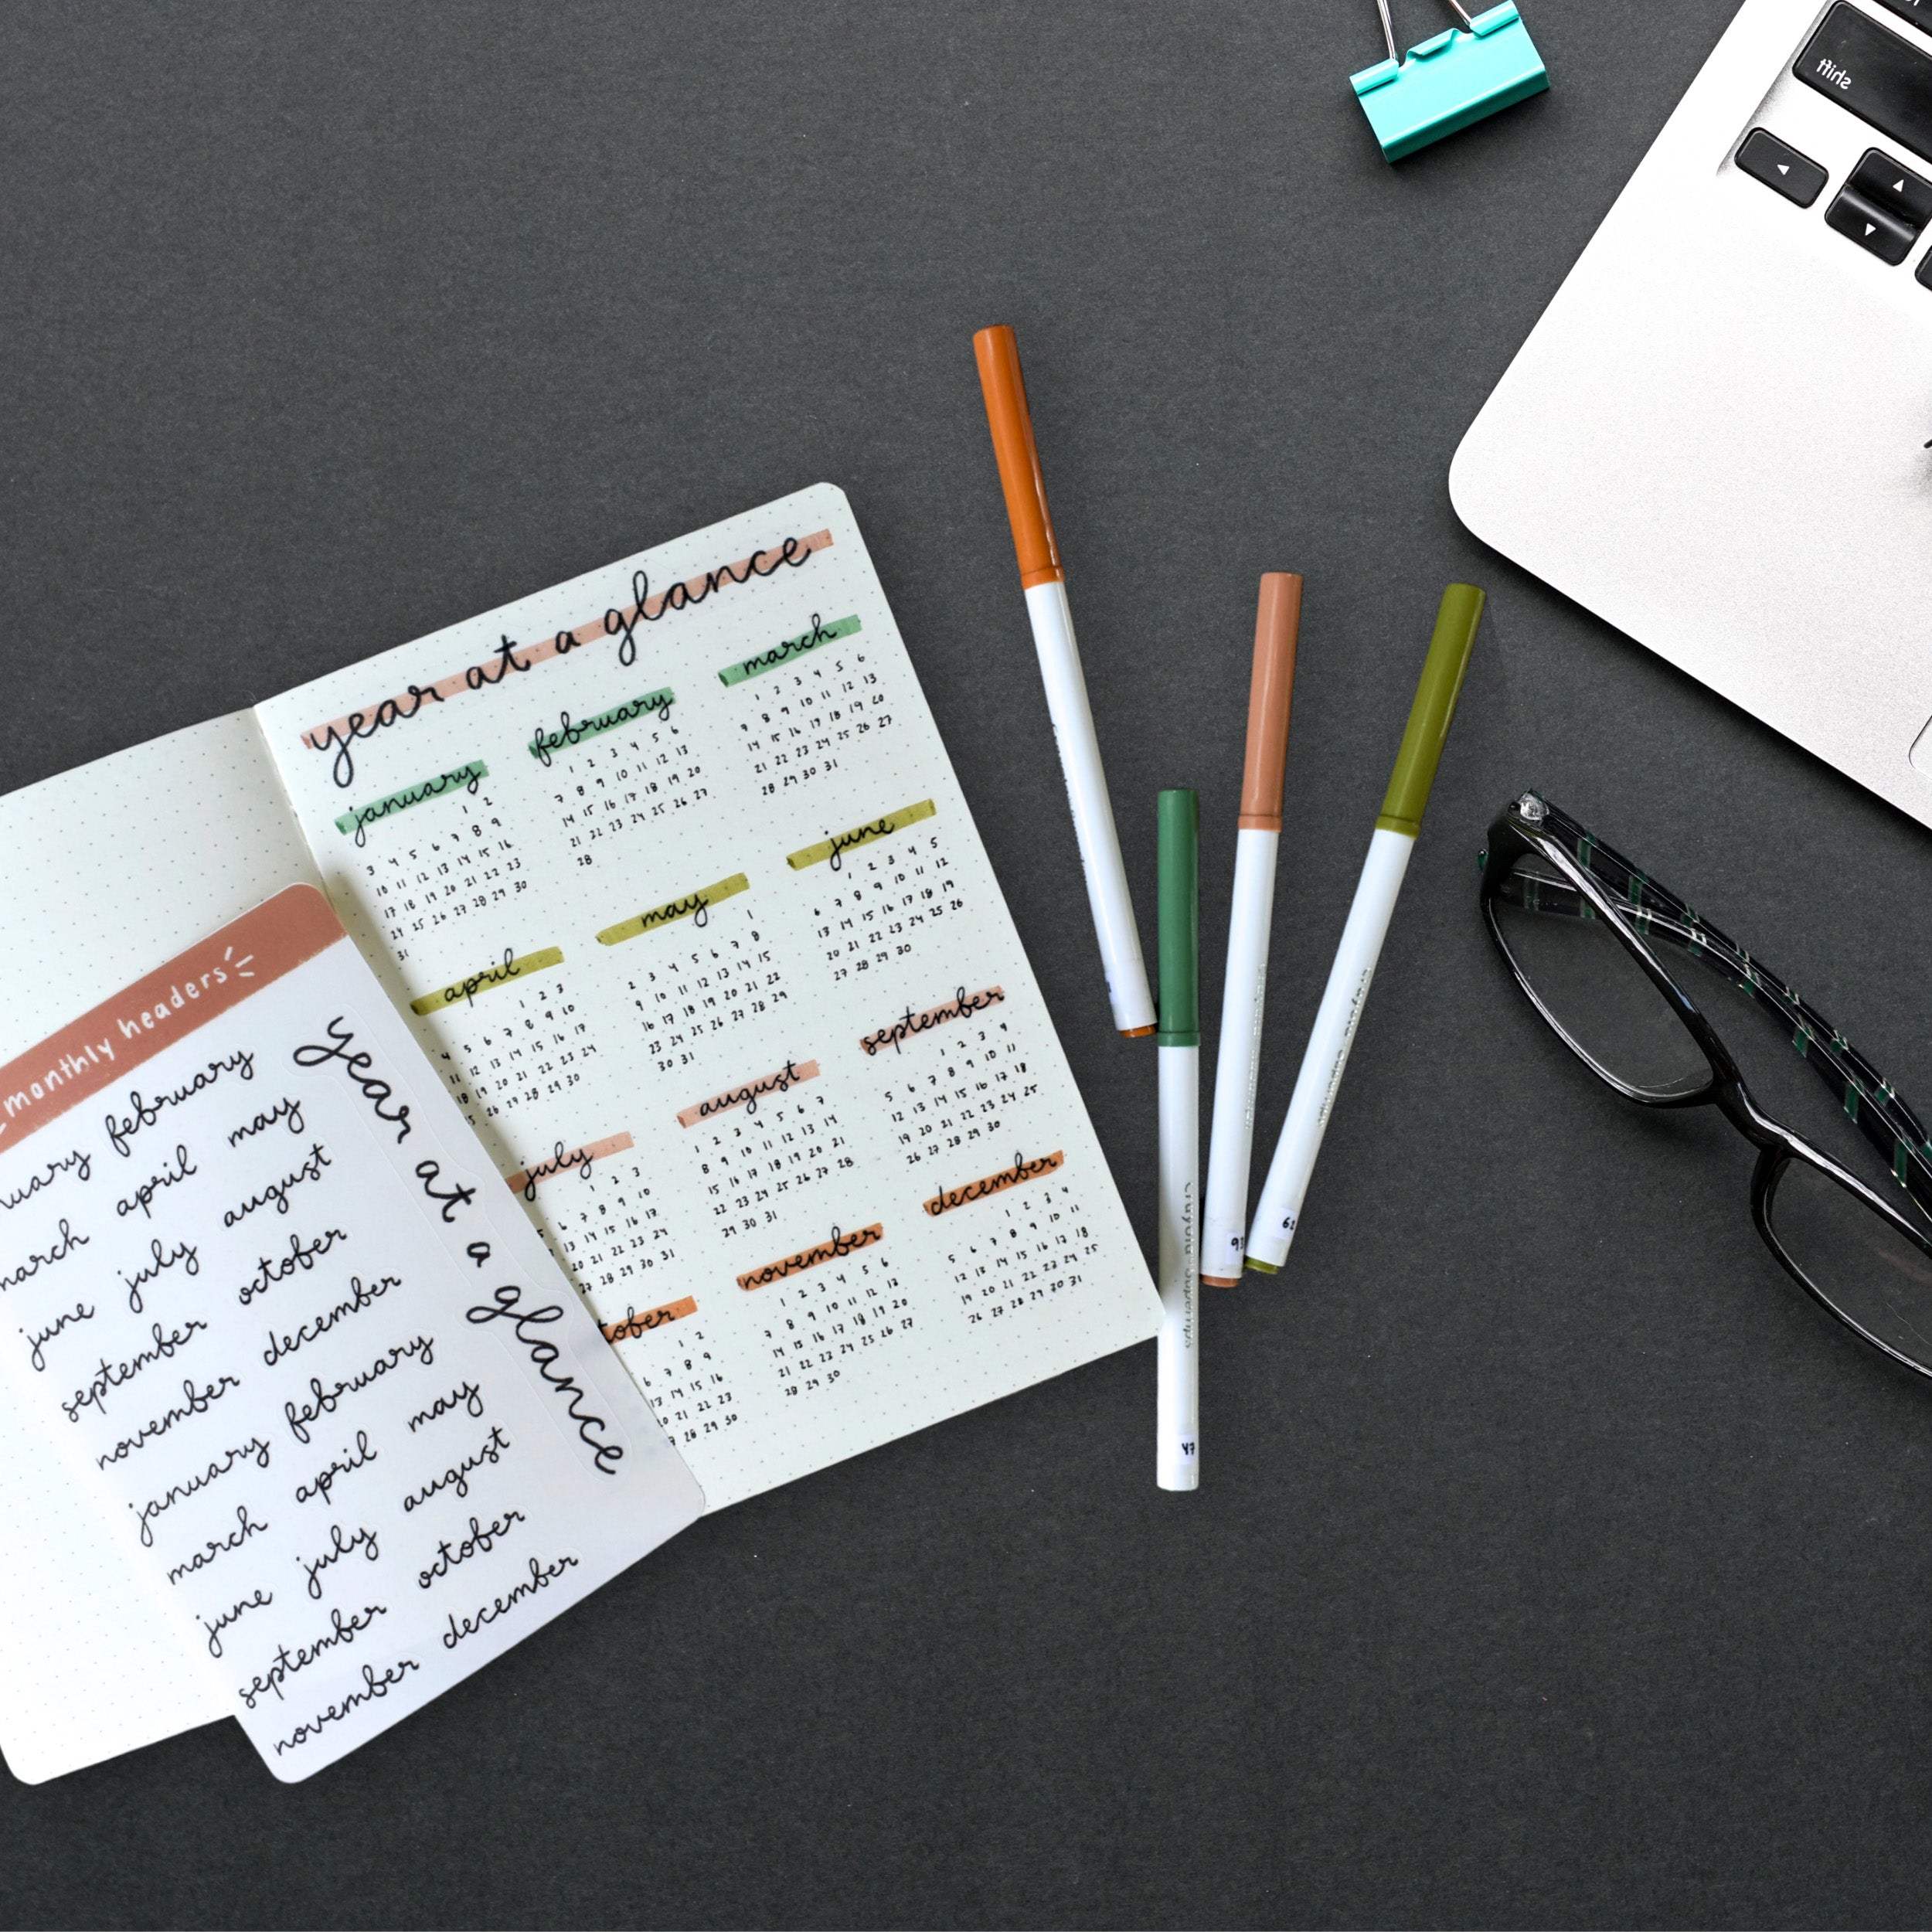 Organize your planner with our Planner Weekly Header Sticker Sheet, featuring stylish and functional monthly header stickers. Ideal for adding a clean and structured look to your planner spreads. These stickers from Lines and Colors Design are sold at BBB Supplies Craft Shop.